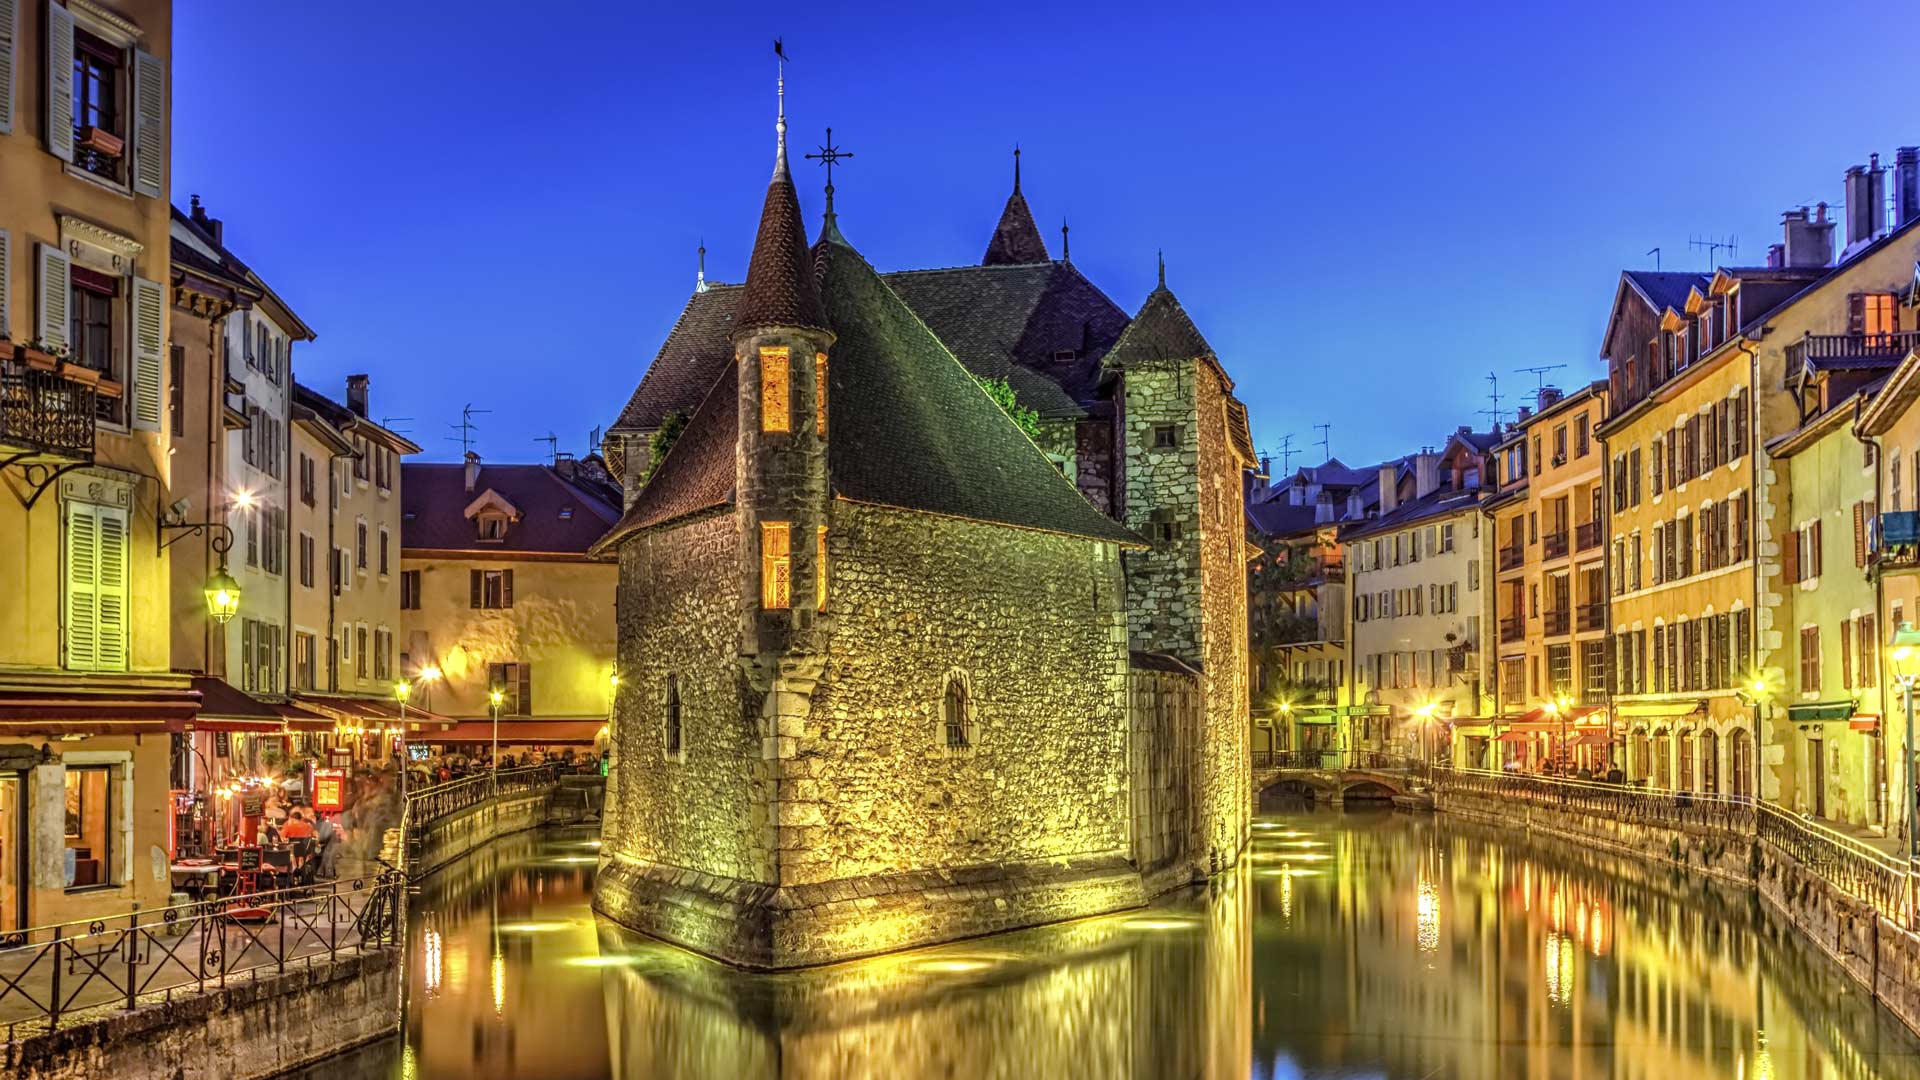 Palais de l’Ile jail and canal in Annecy old city, France, HDR